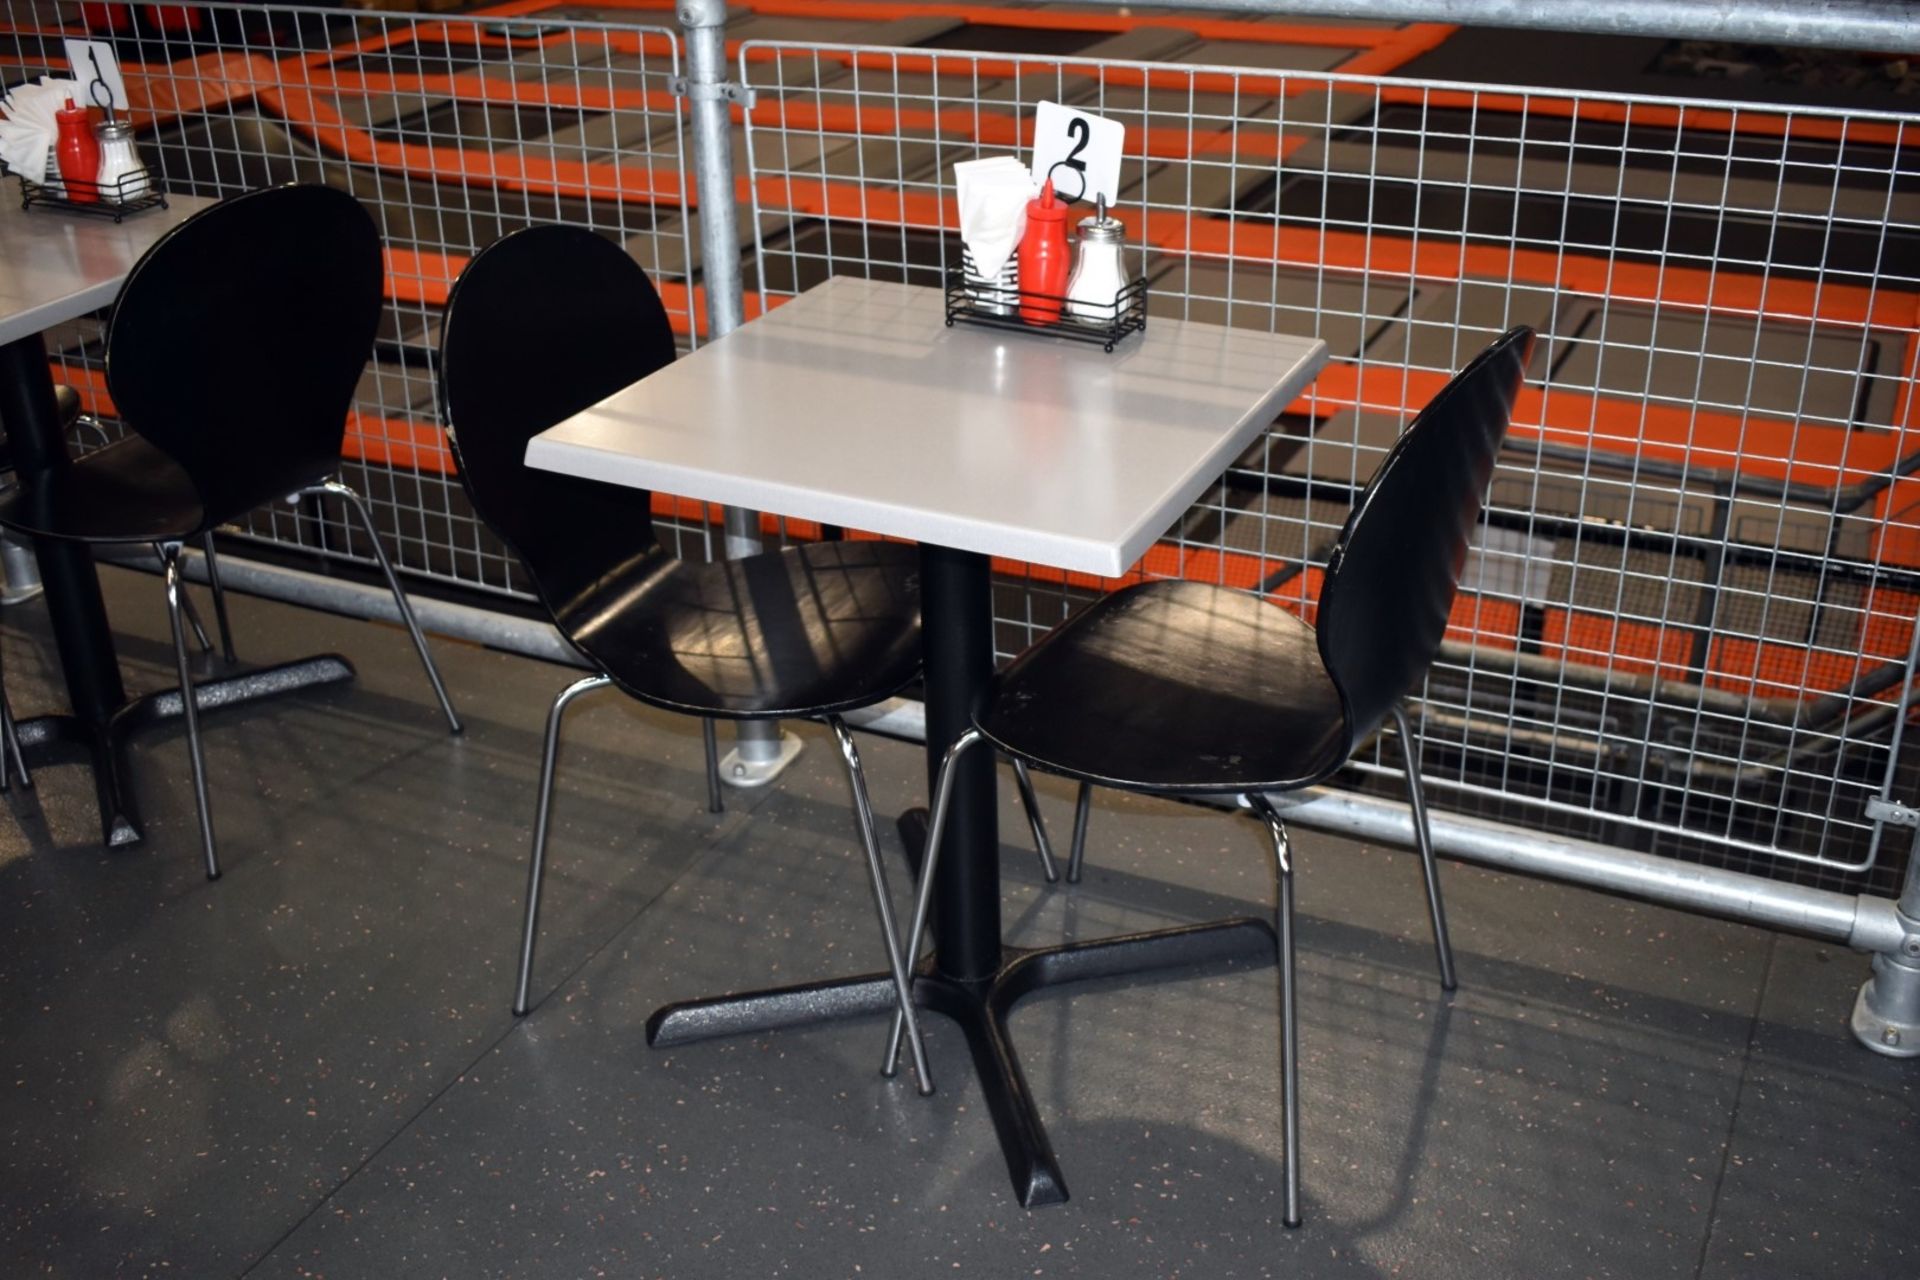 8 x Table and Chair Sets Suitable For Canteens, Cafes or Bistros - Includes 8 Tables and 24 Chairs - Image 11 of 15